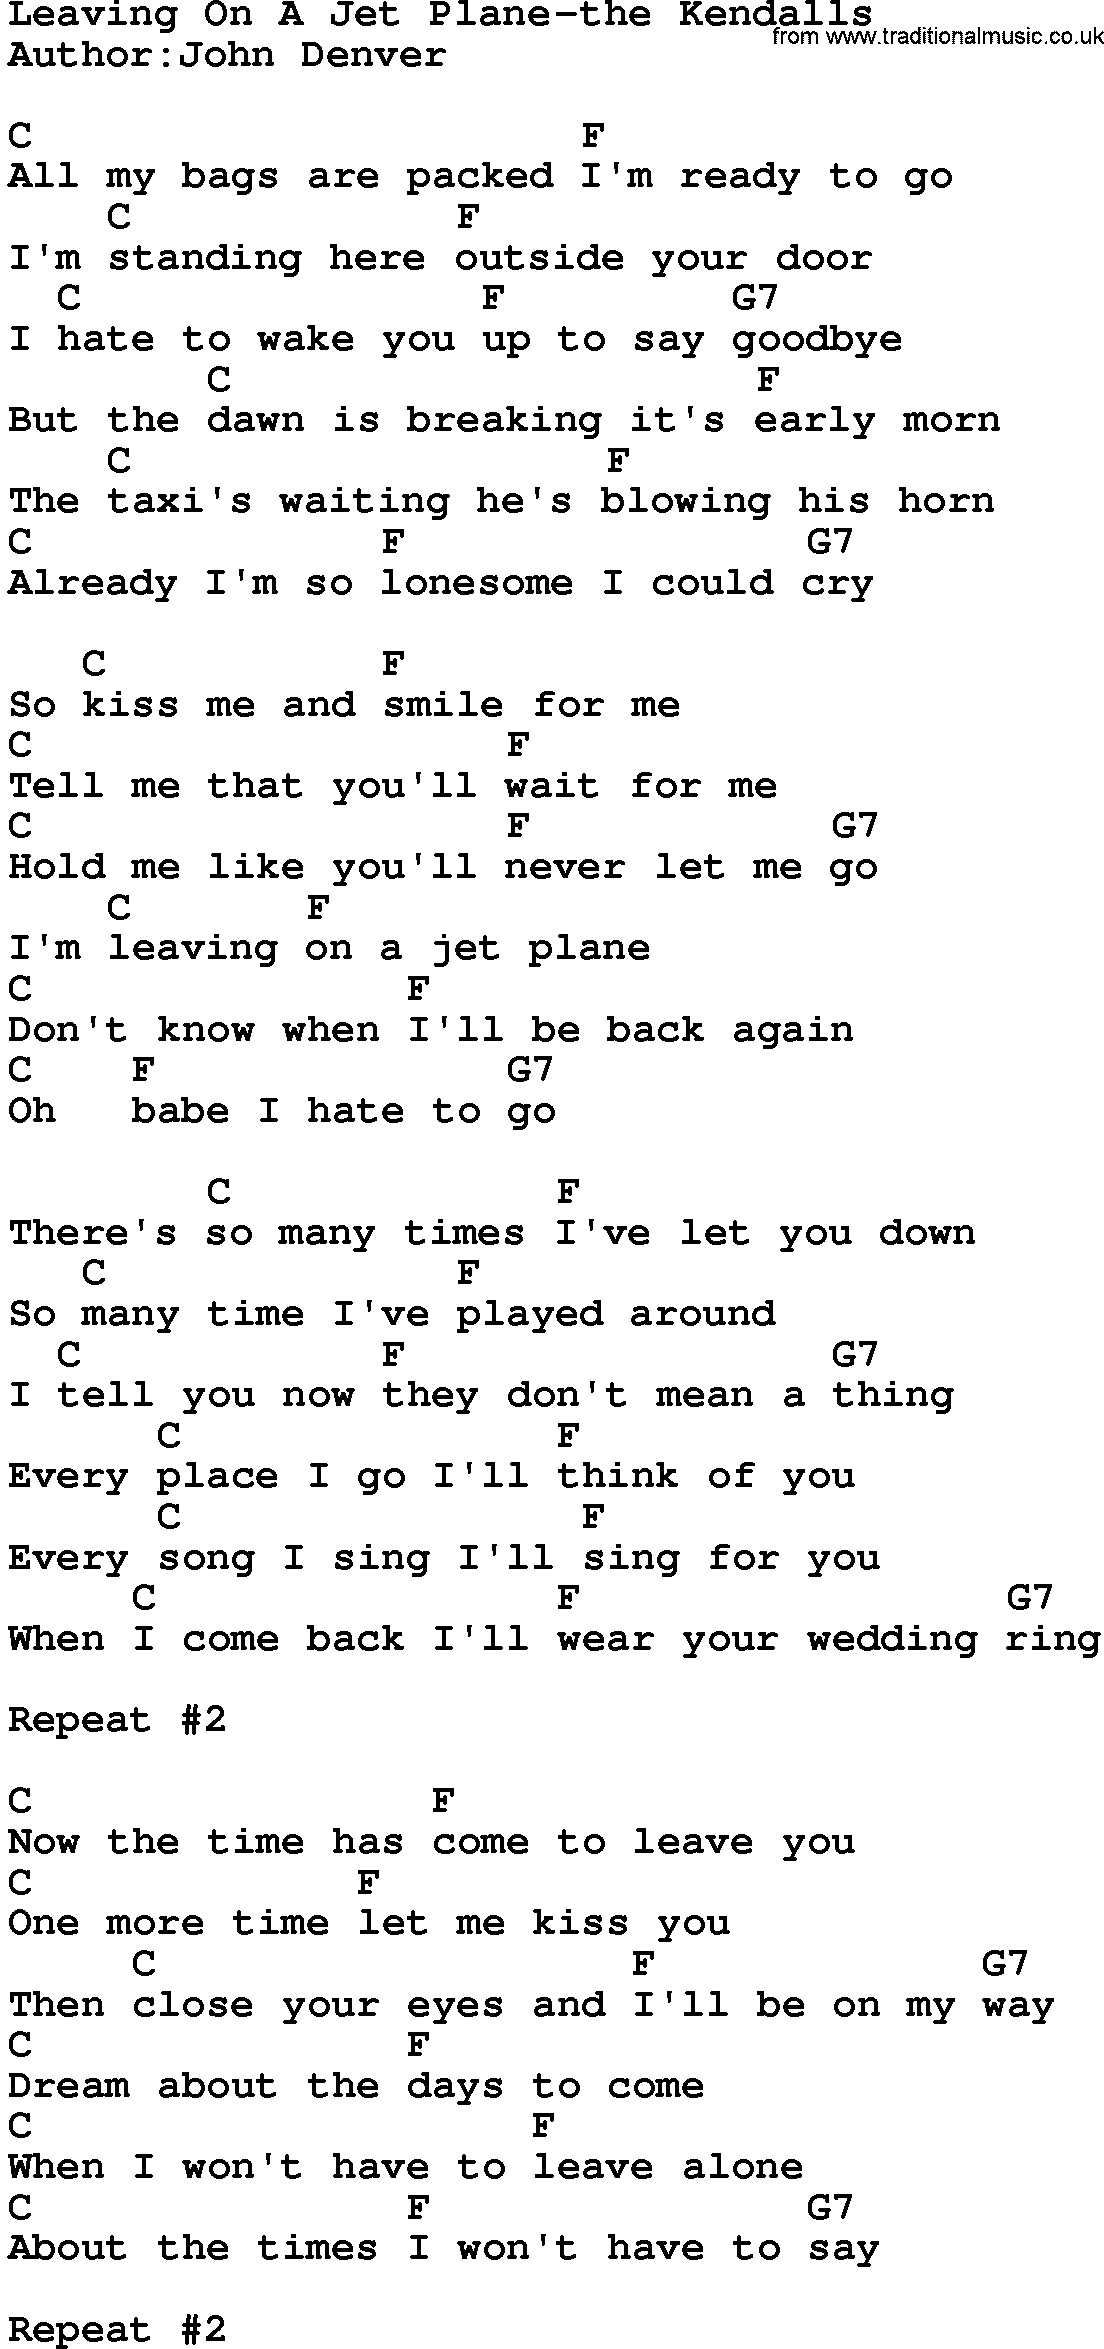 Country music song: Leaving On A Jet Plane-The Kendalls lyrics and chords